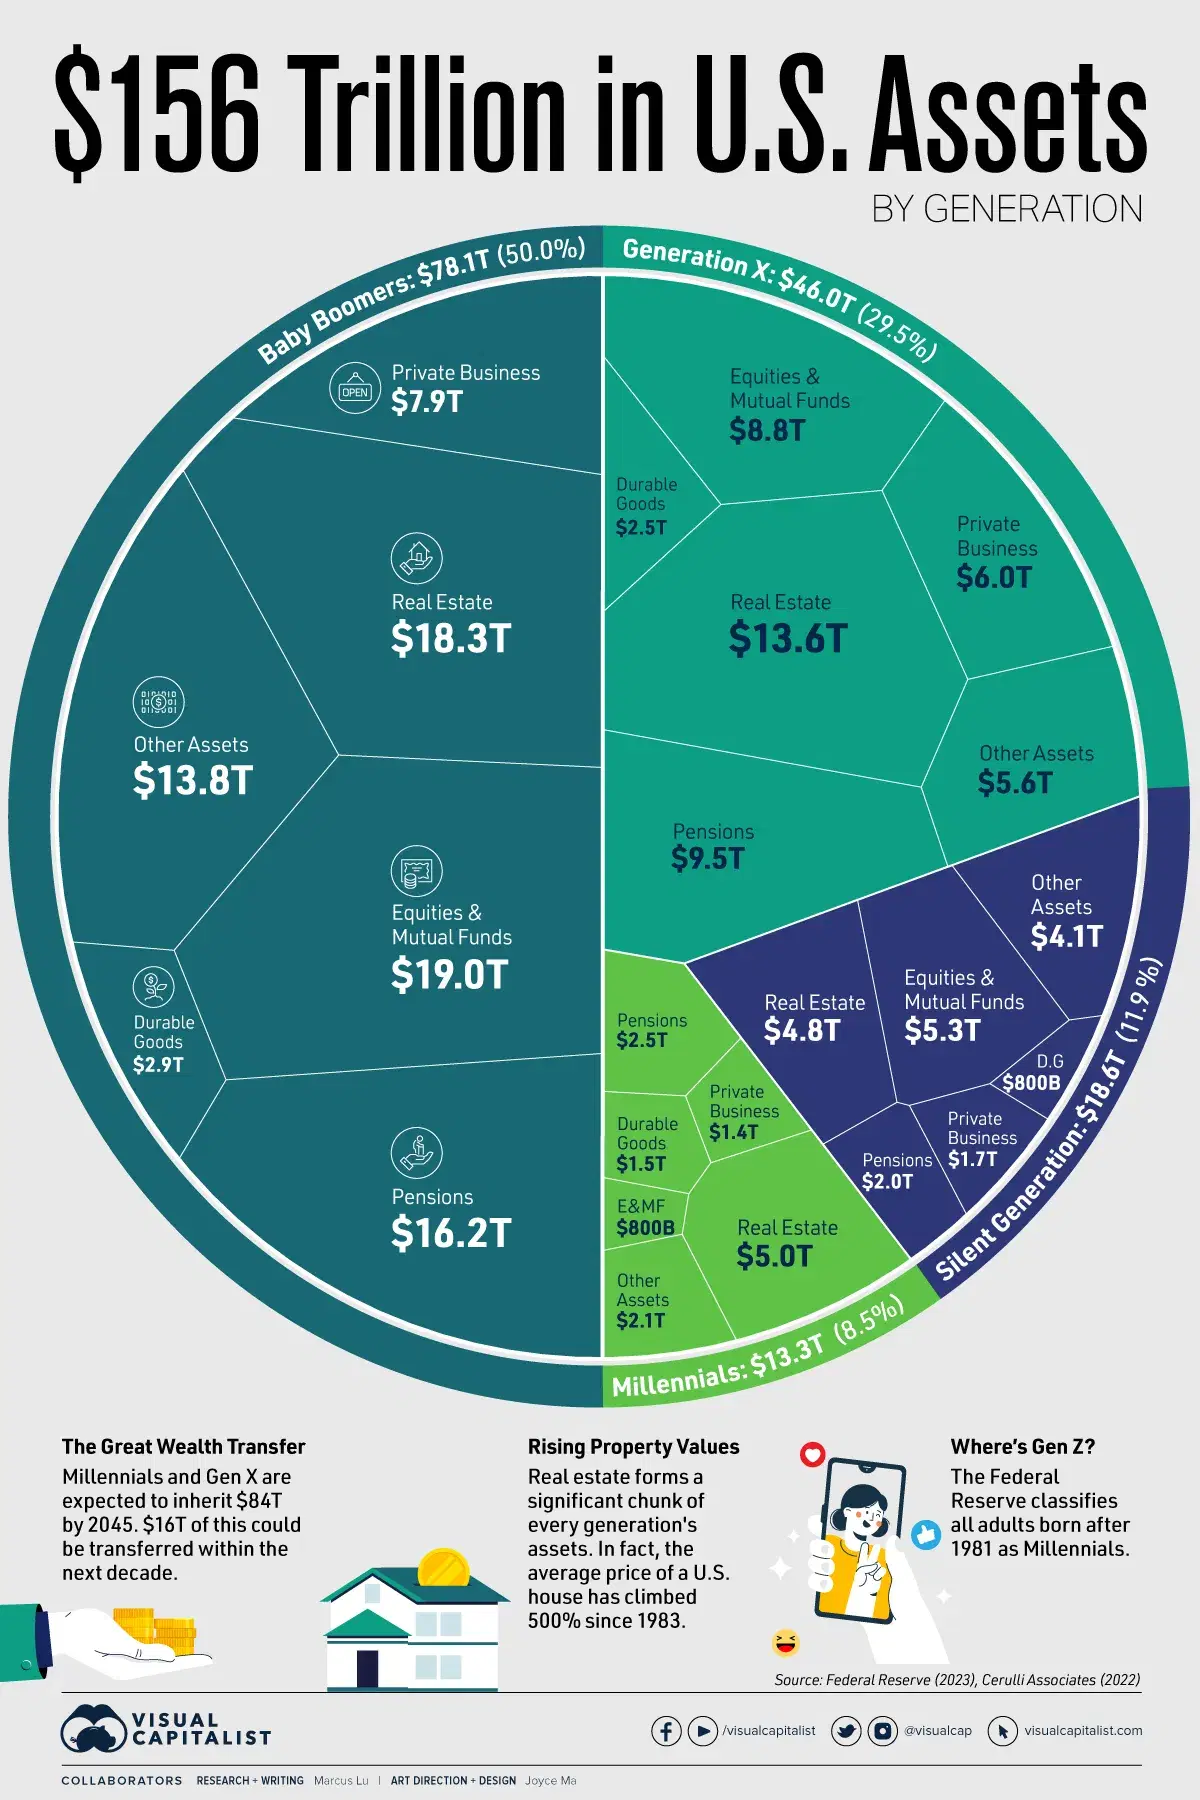 Visualizing $156 Trillion in U.S. Assets, by Generation